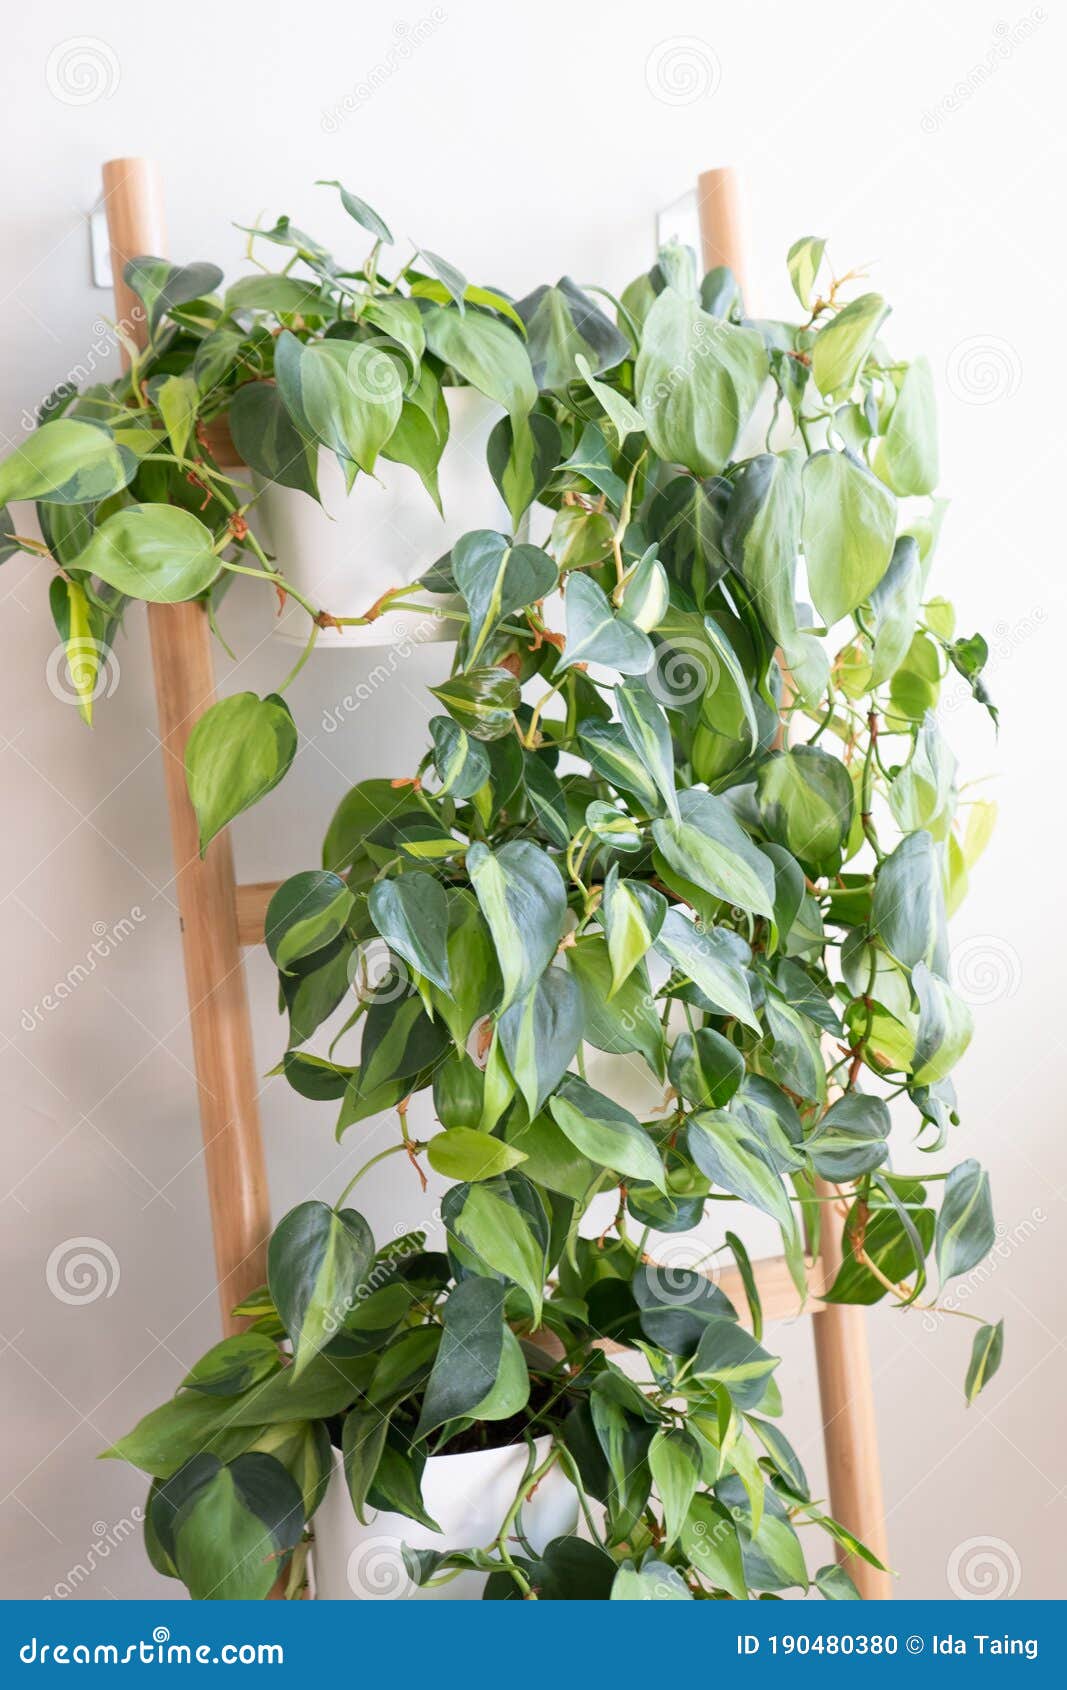 philodendron brasil house plants growing on a ladder